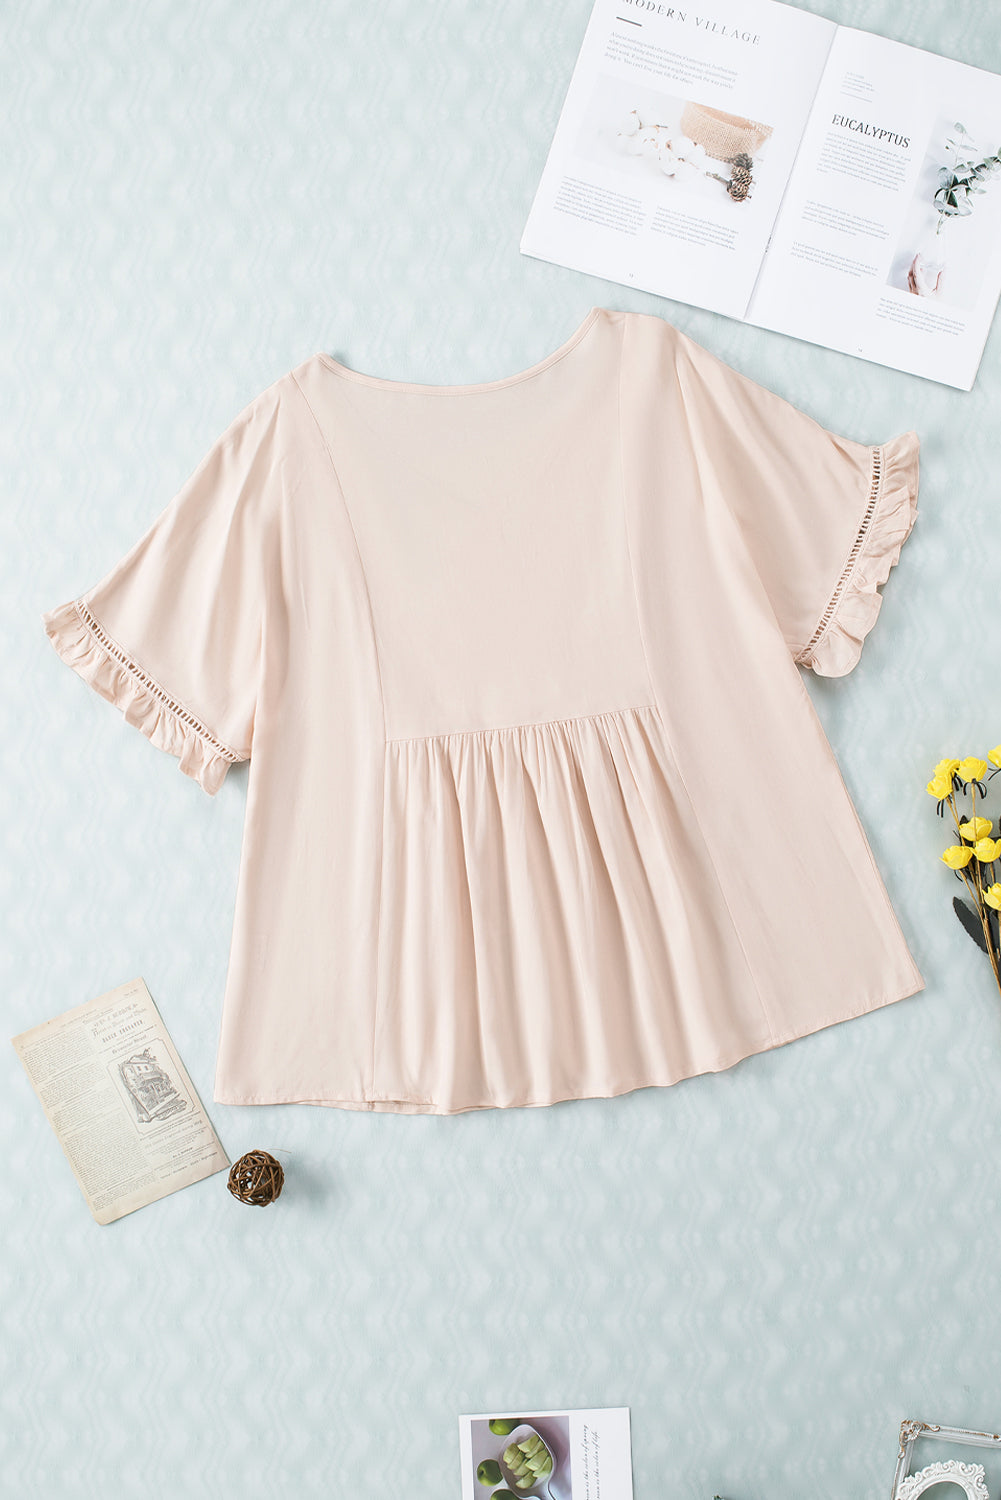 V-Neck Flounce Sleeve Babydoll Blouse - Women’s Clothing & Accessories - Shirts & Tops - 7 - 2024